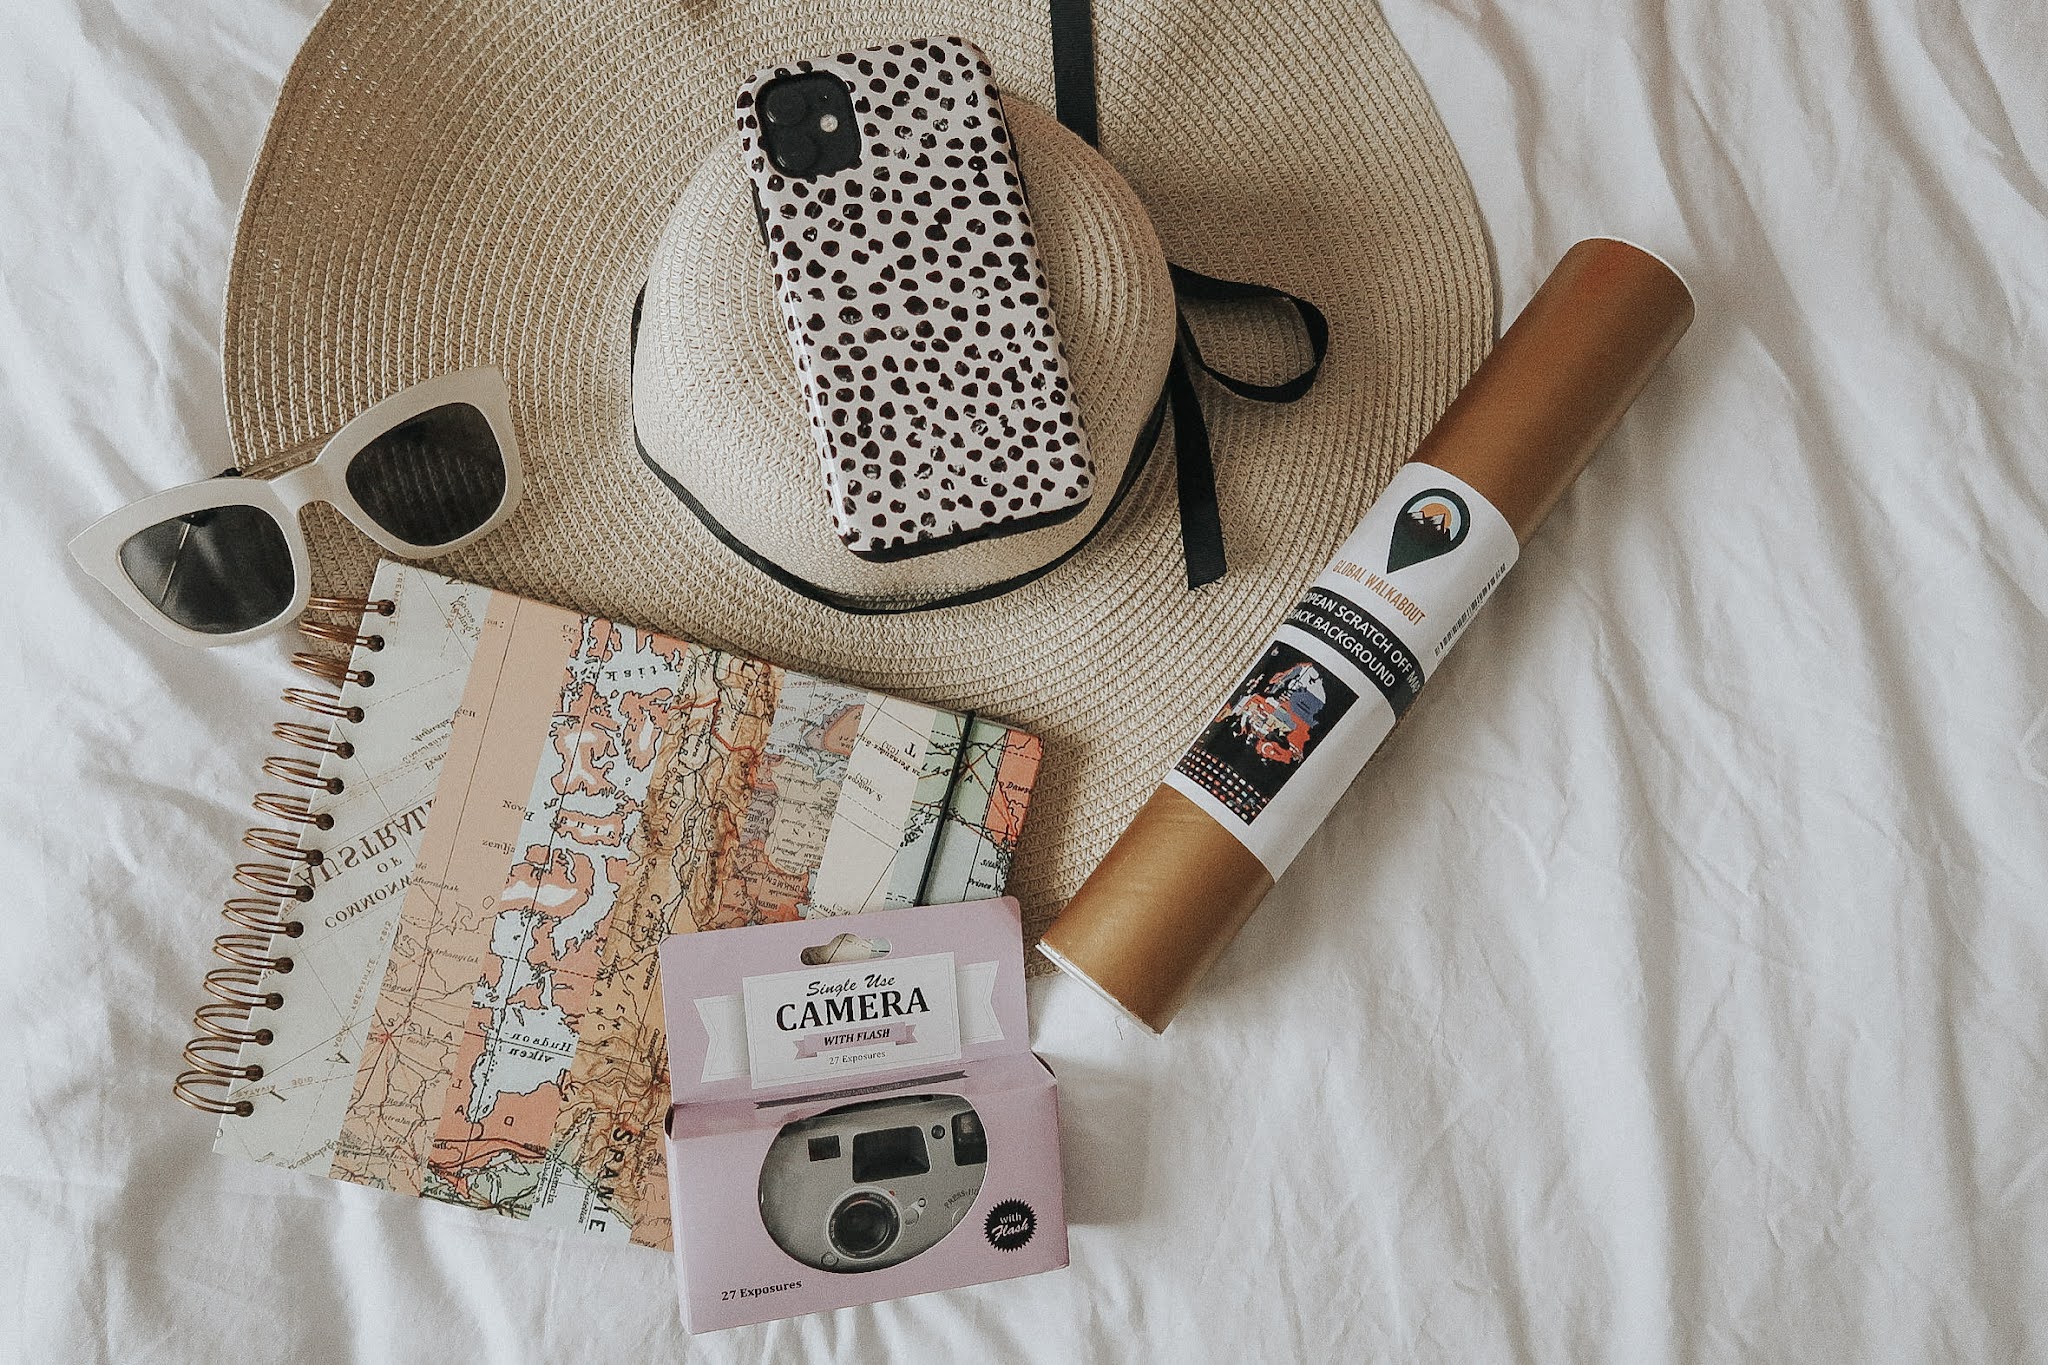 A purple disposable camera, white sunglasses, a gold rolled up map and scrapobook.